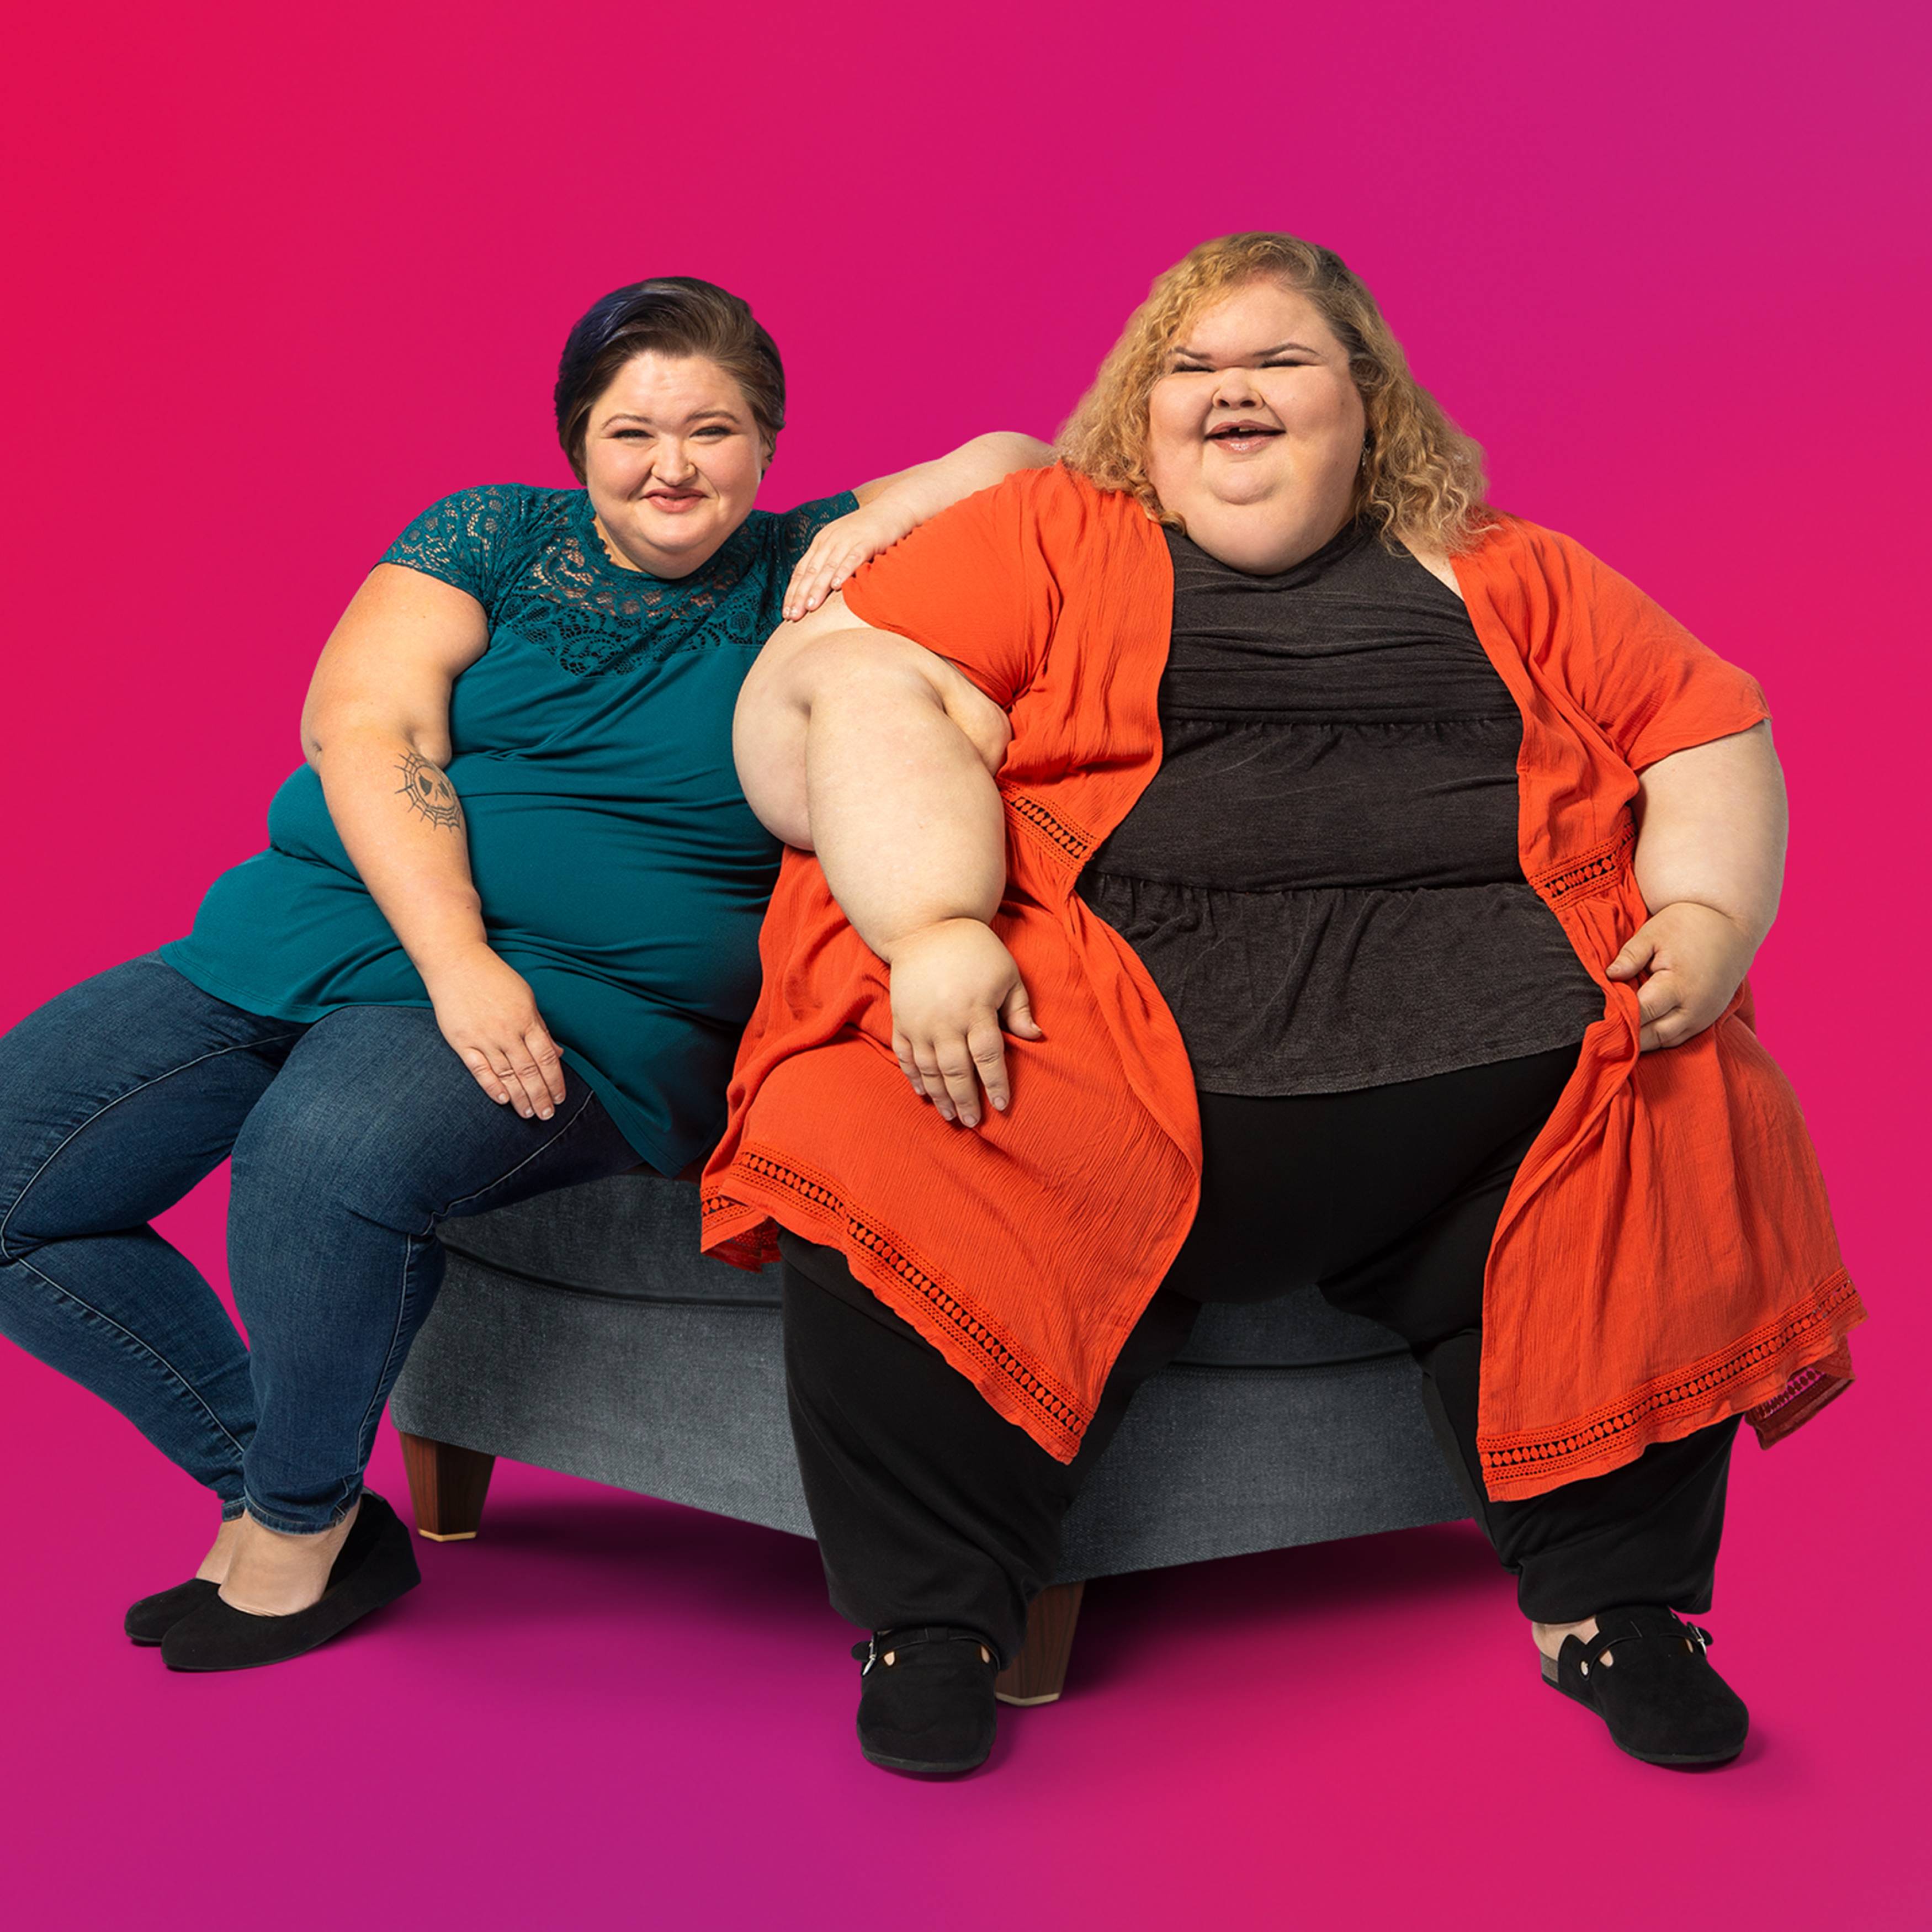 Stream 1000lb Sisters discovery+